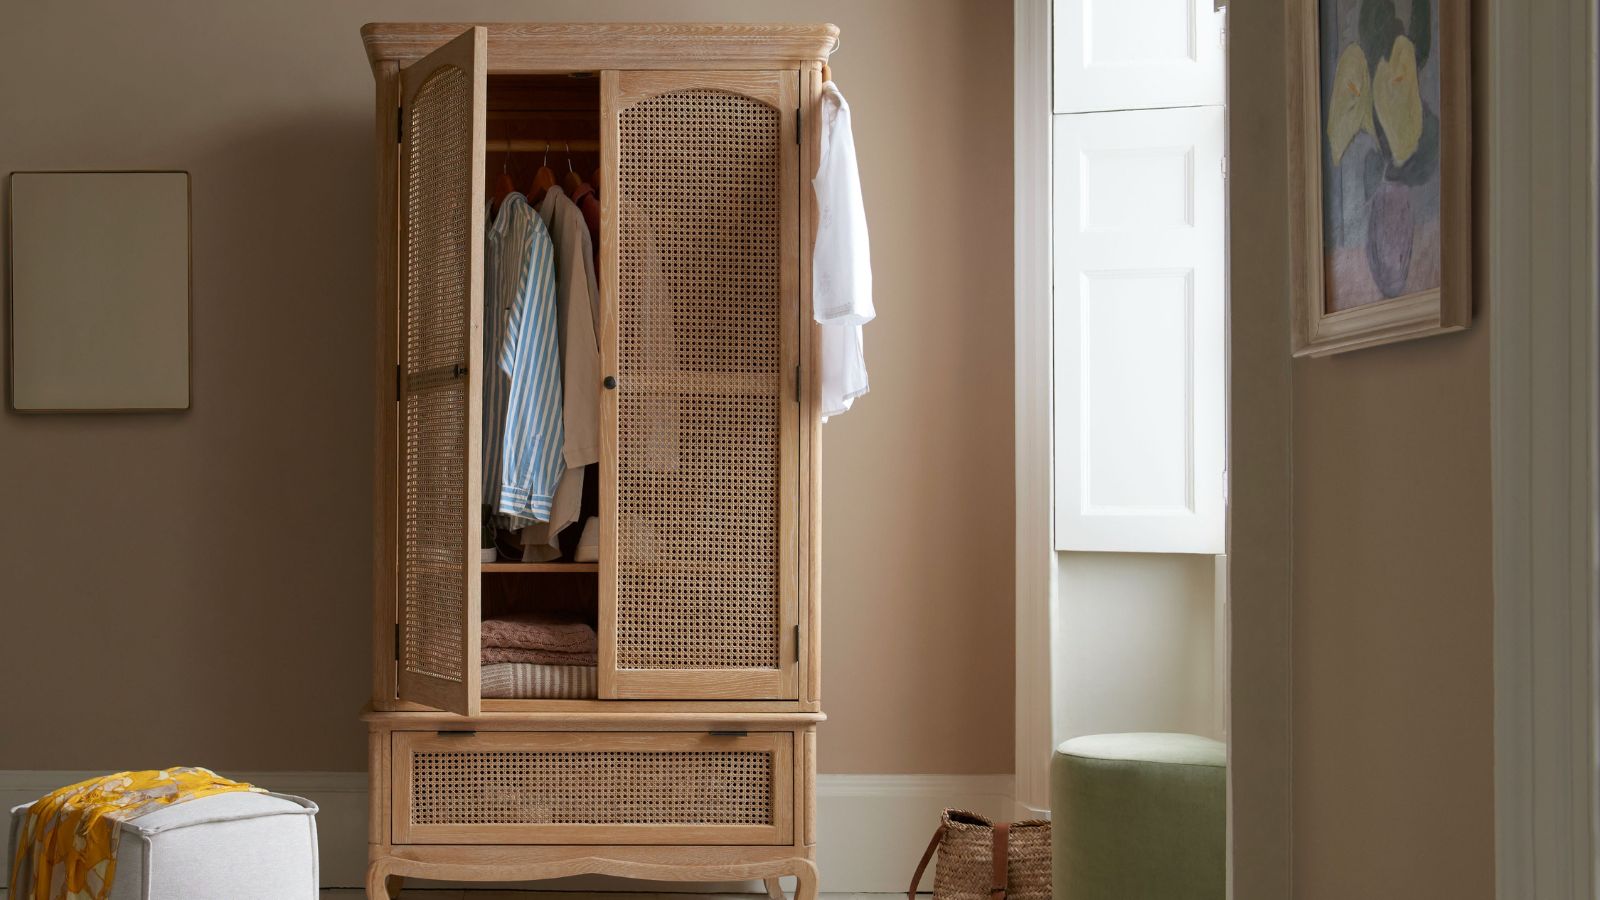 Small Closet Organizers To Help Cure Home Clutter Issues